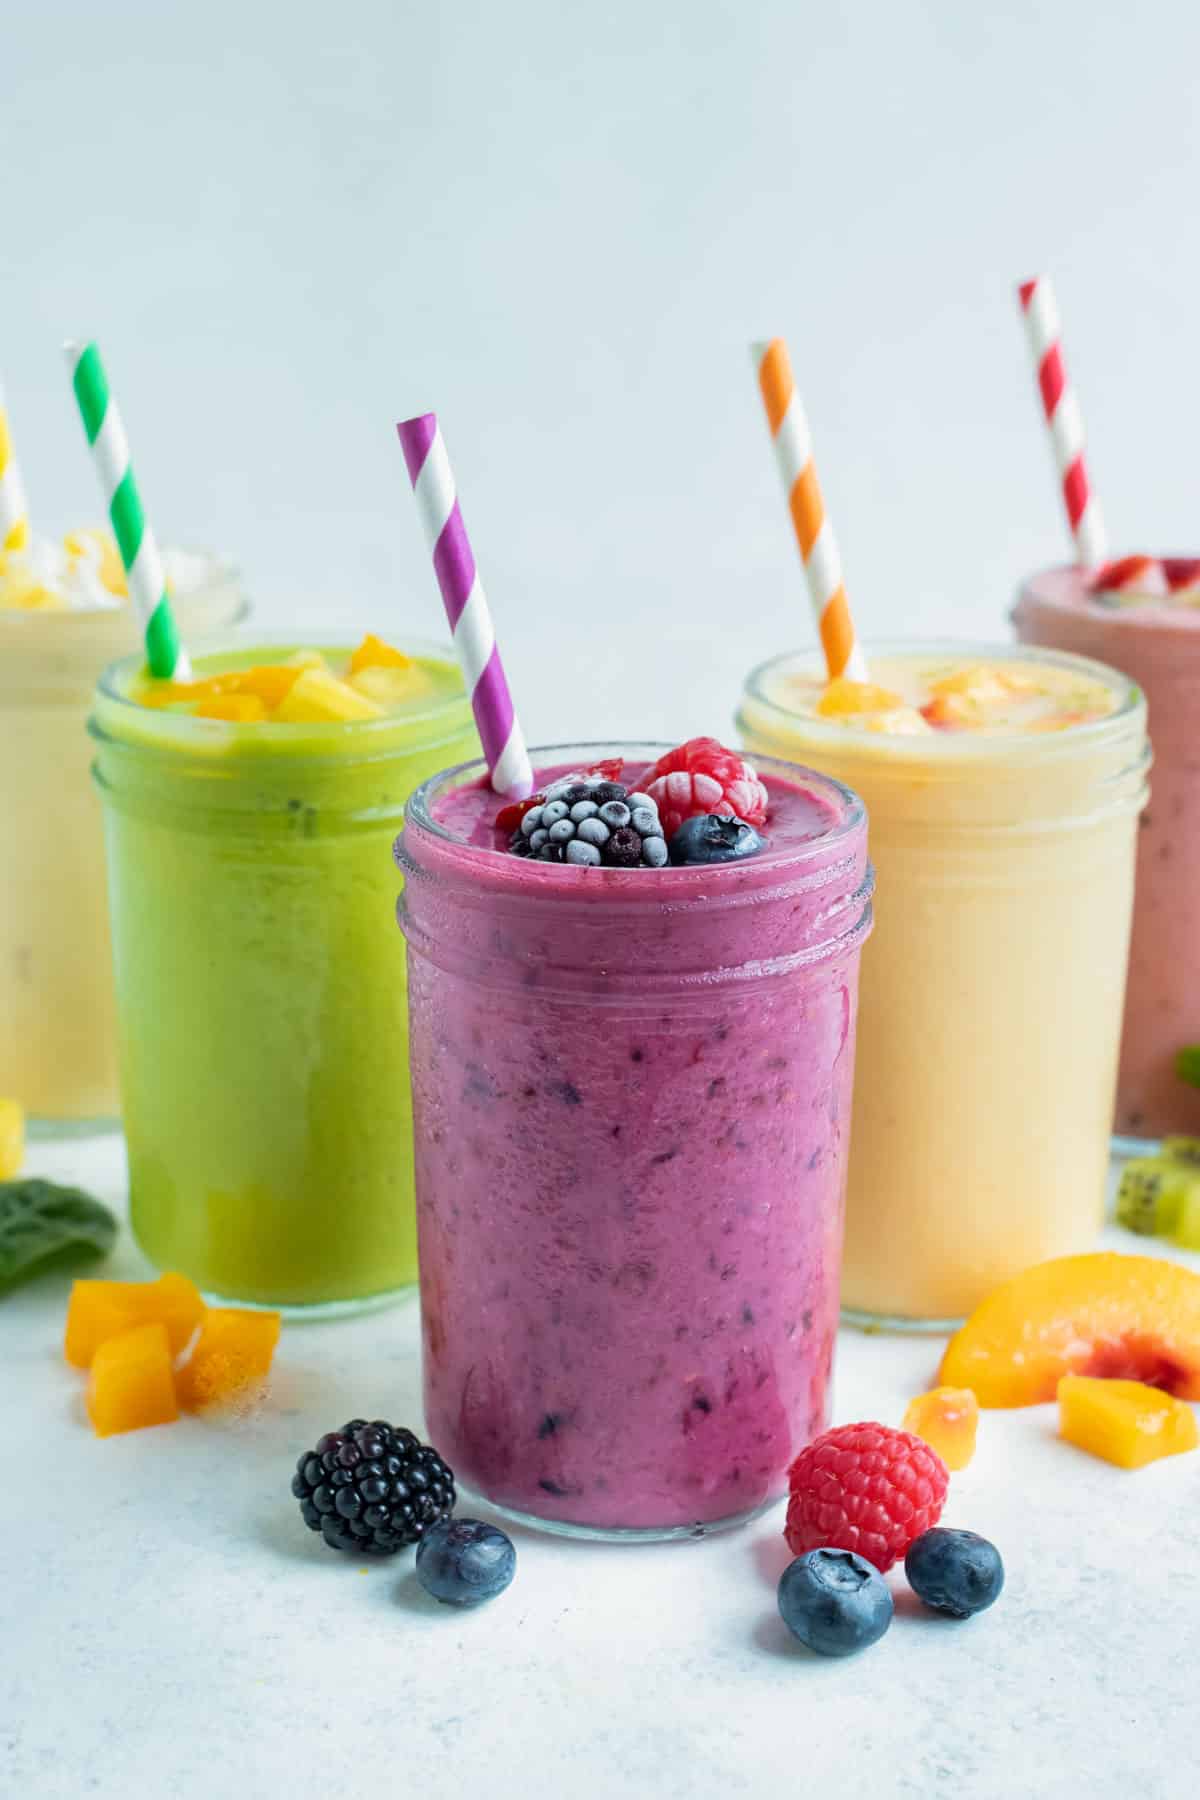 How to Make a Fruit Smoothie + 5 Easy Recipes! - Evolving Table